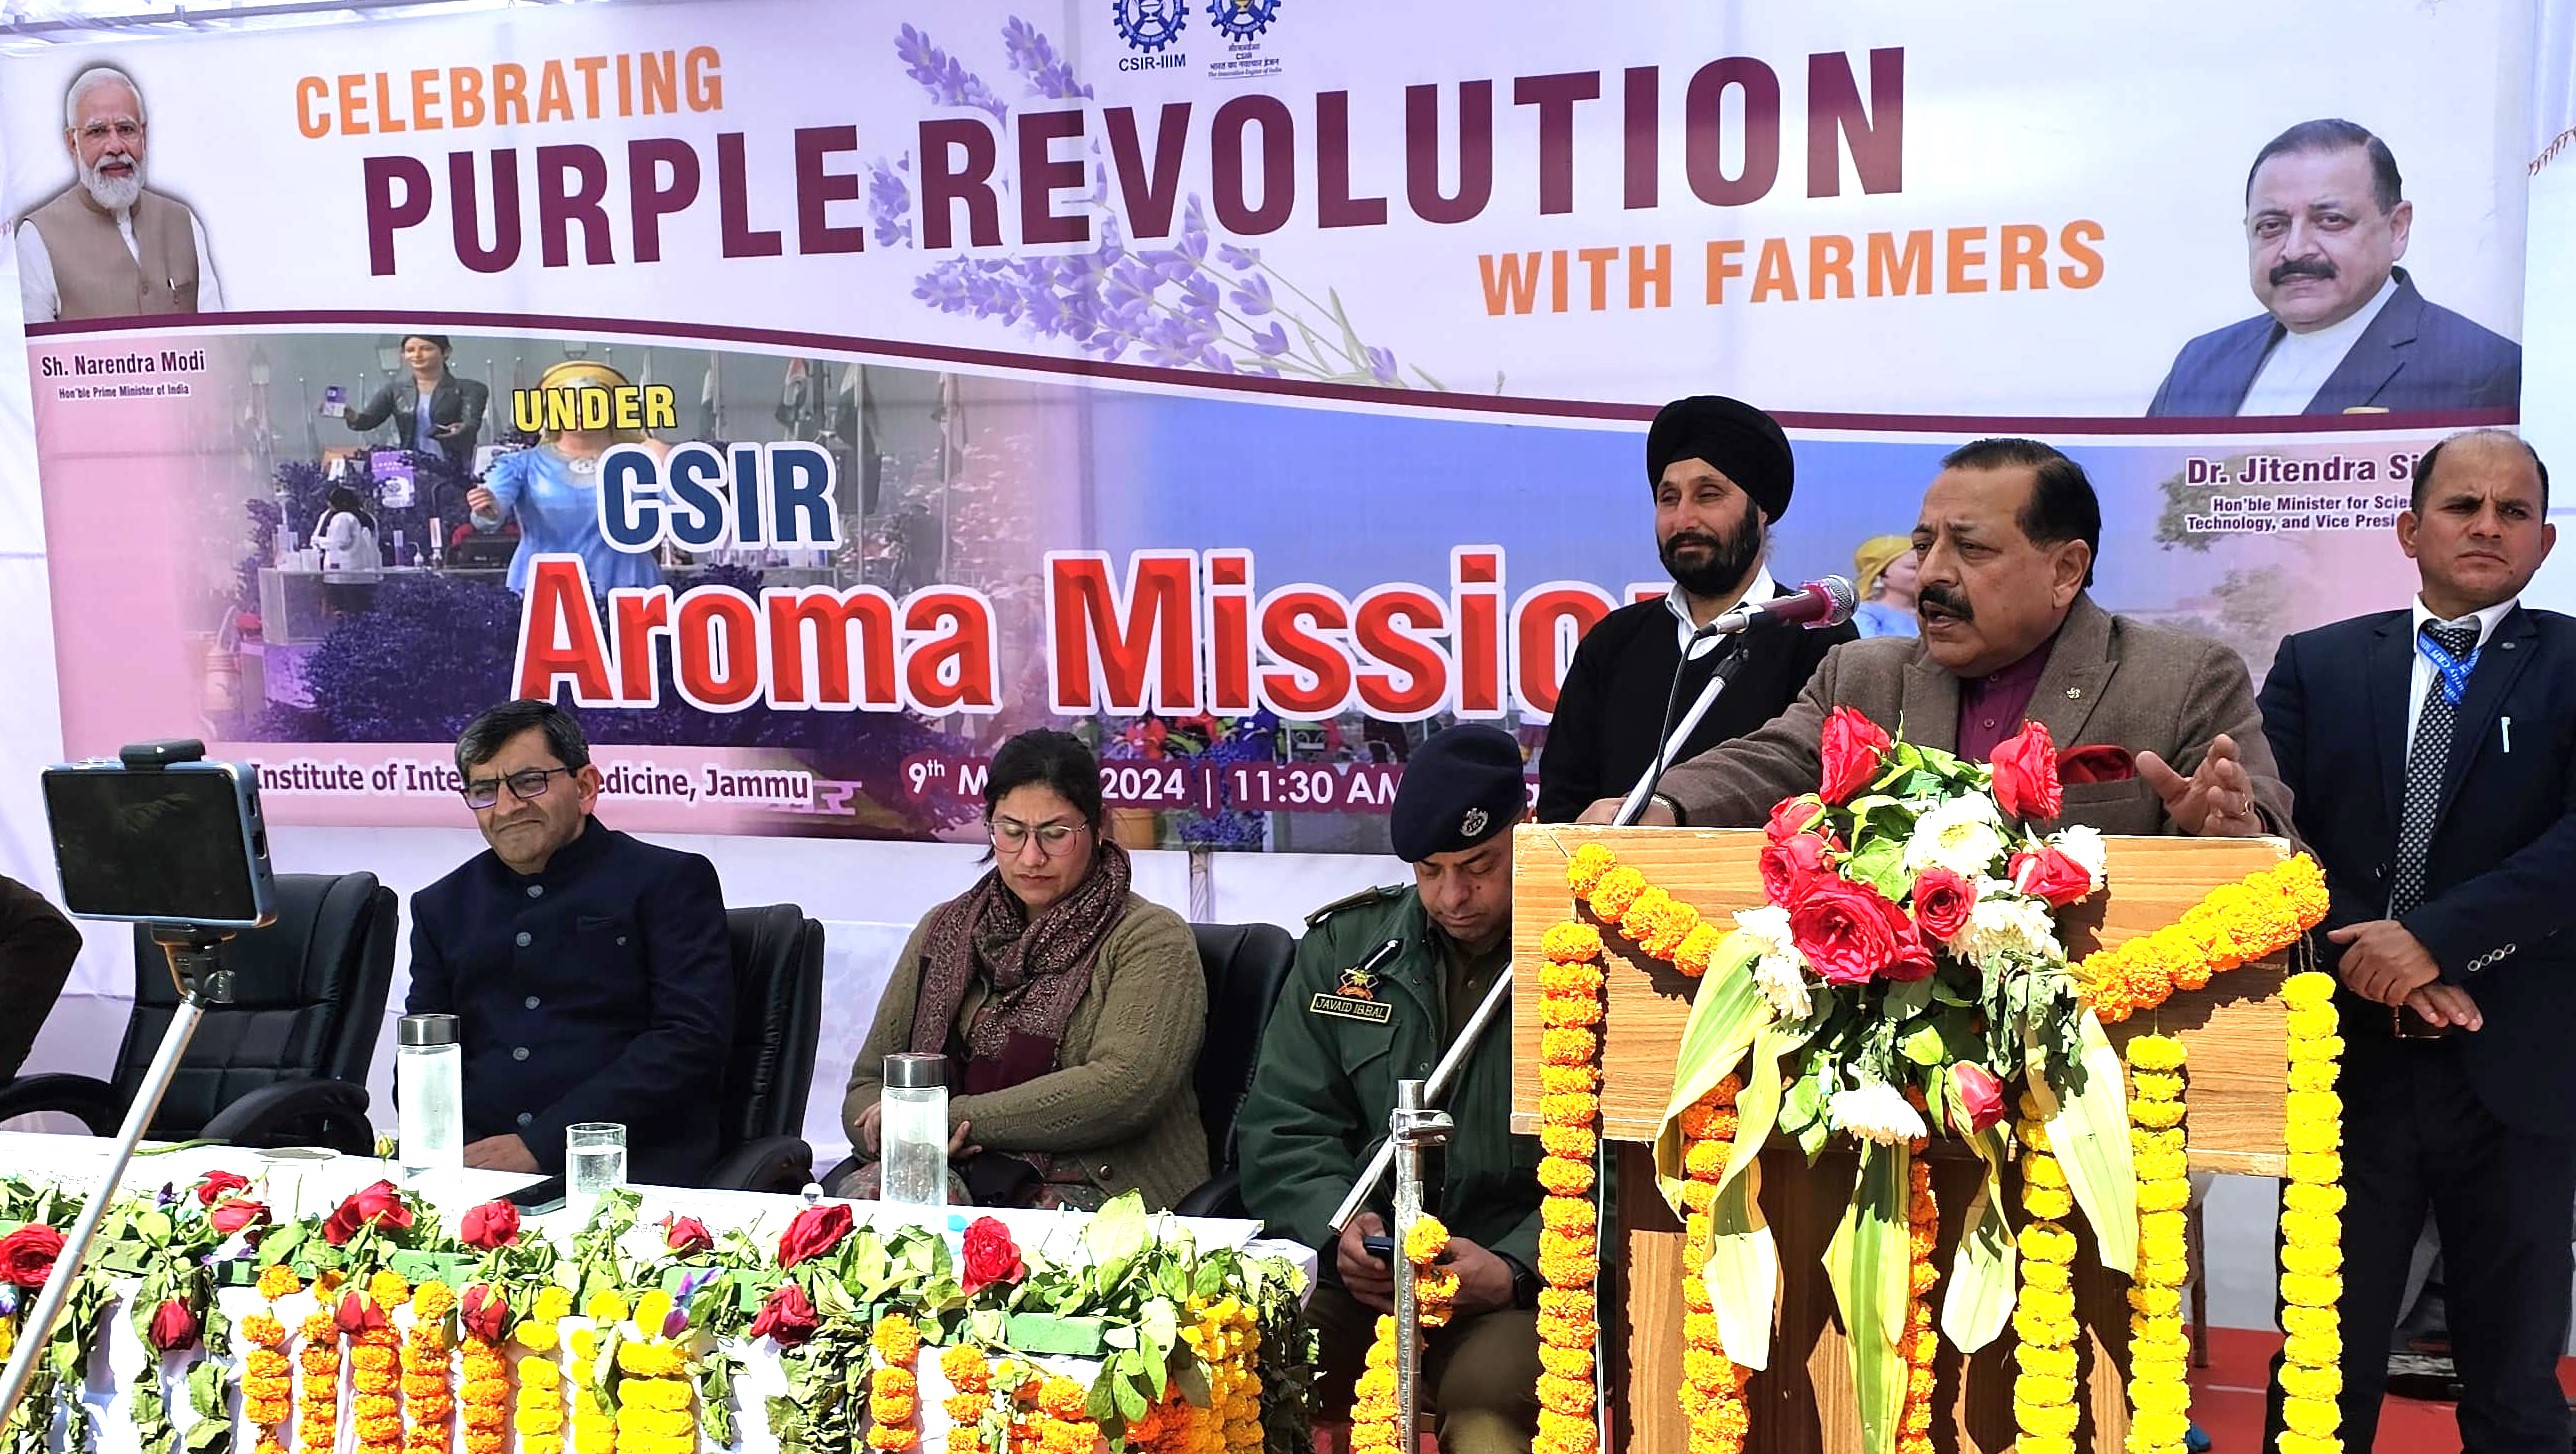 Earlier governments neglected the entire region of erstwhile Doda district, whereas under Prime Minister Shri Narendra Modi, this Government ensured equitable development and restored communal harmony, says Union Minister Dr Jitendra Singh